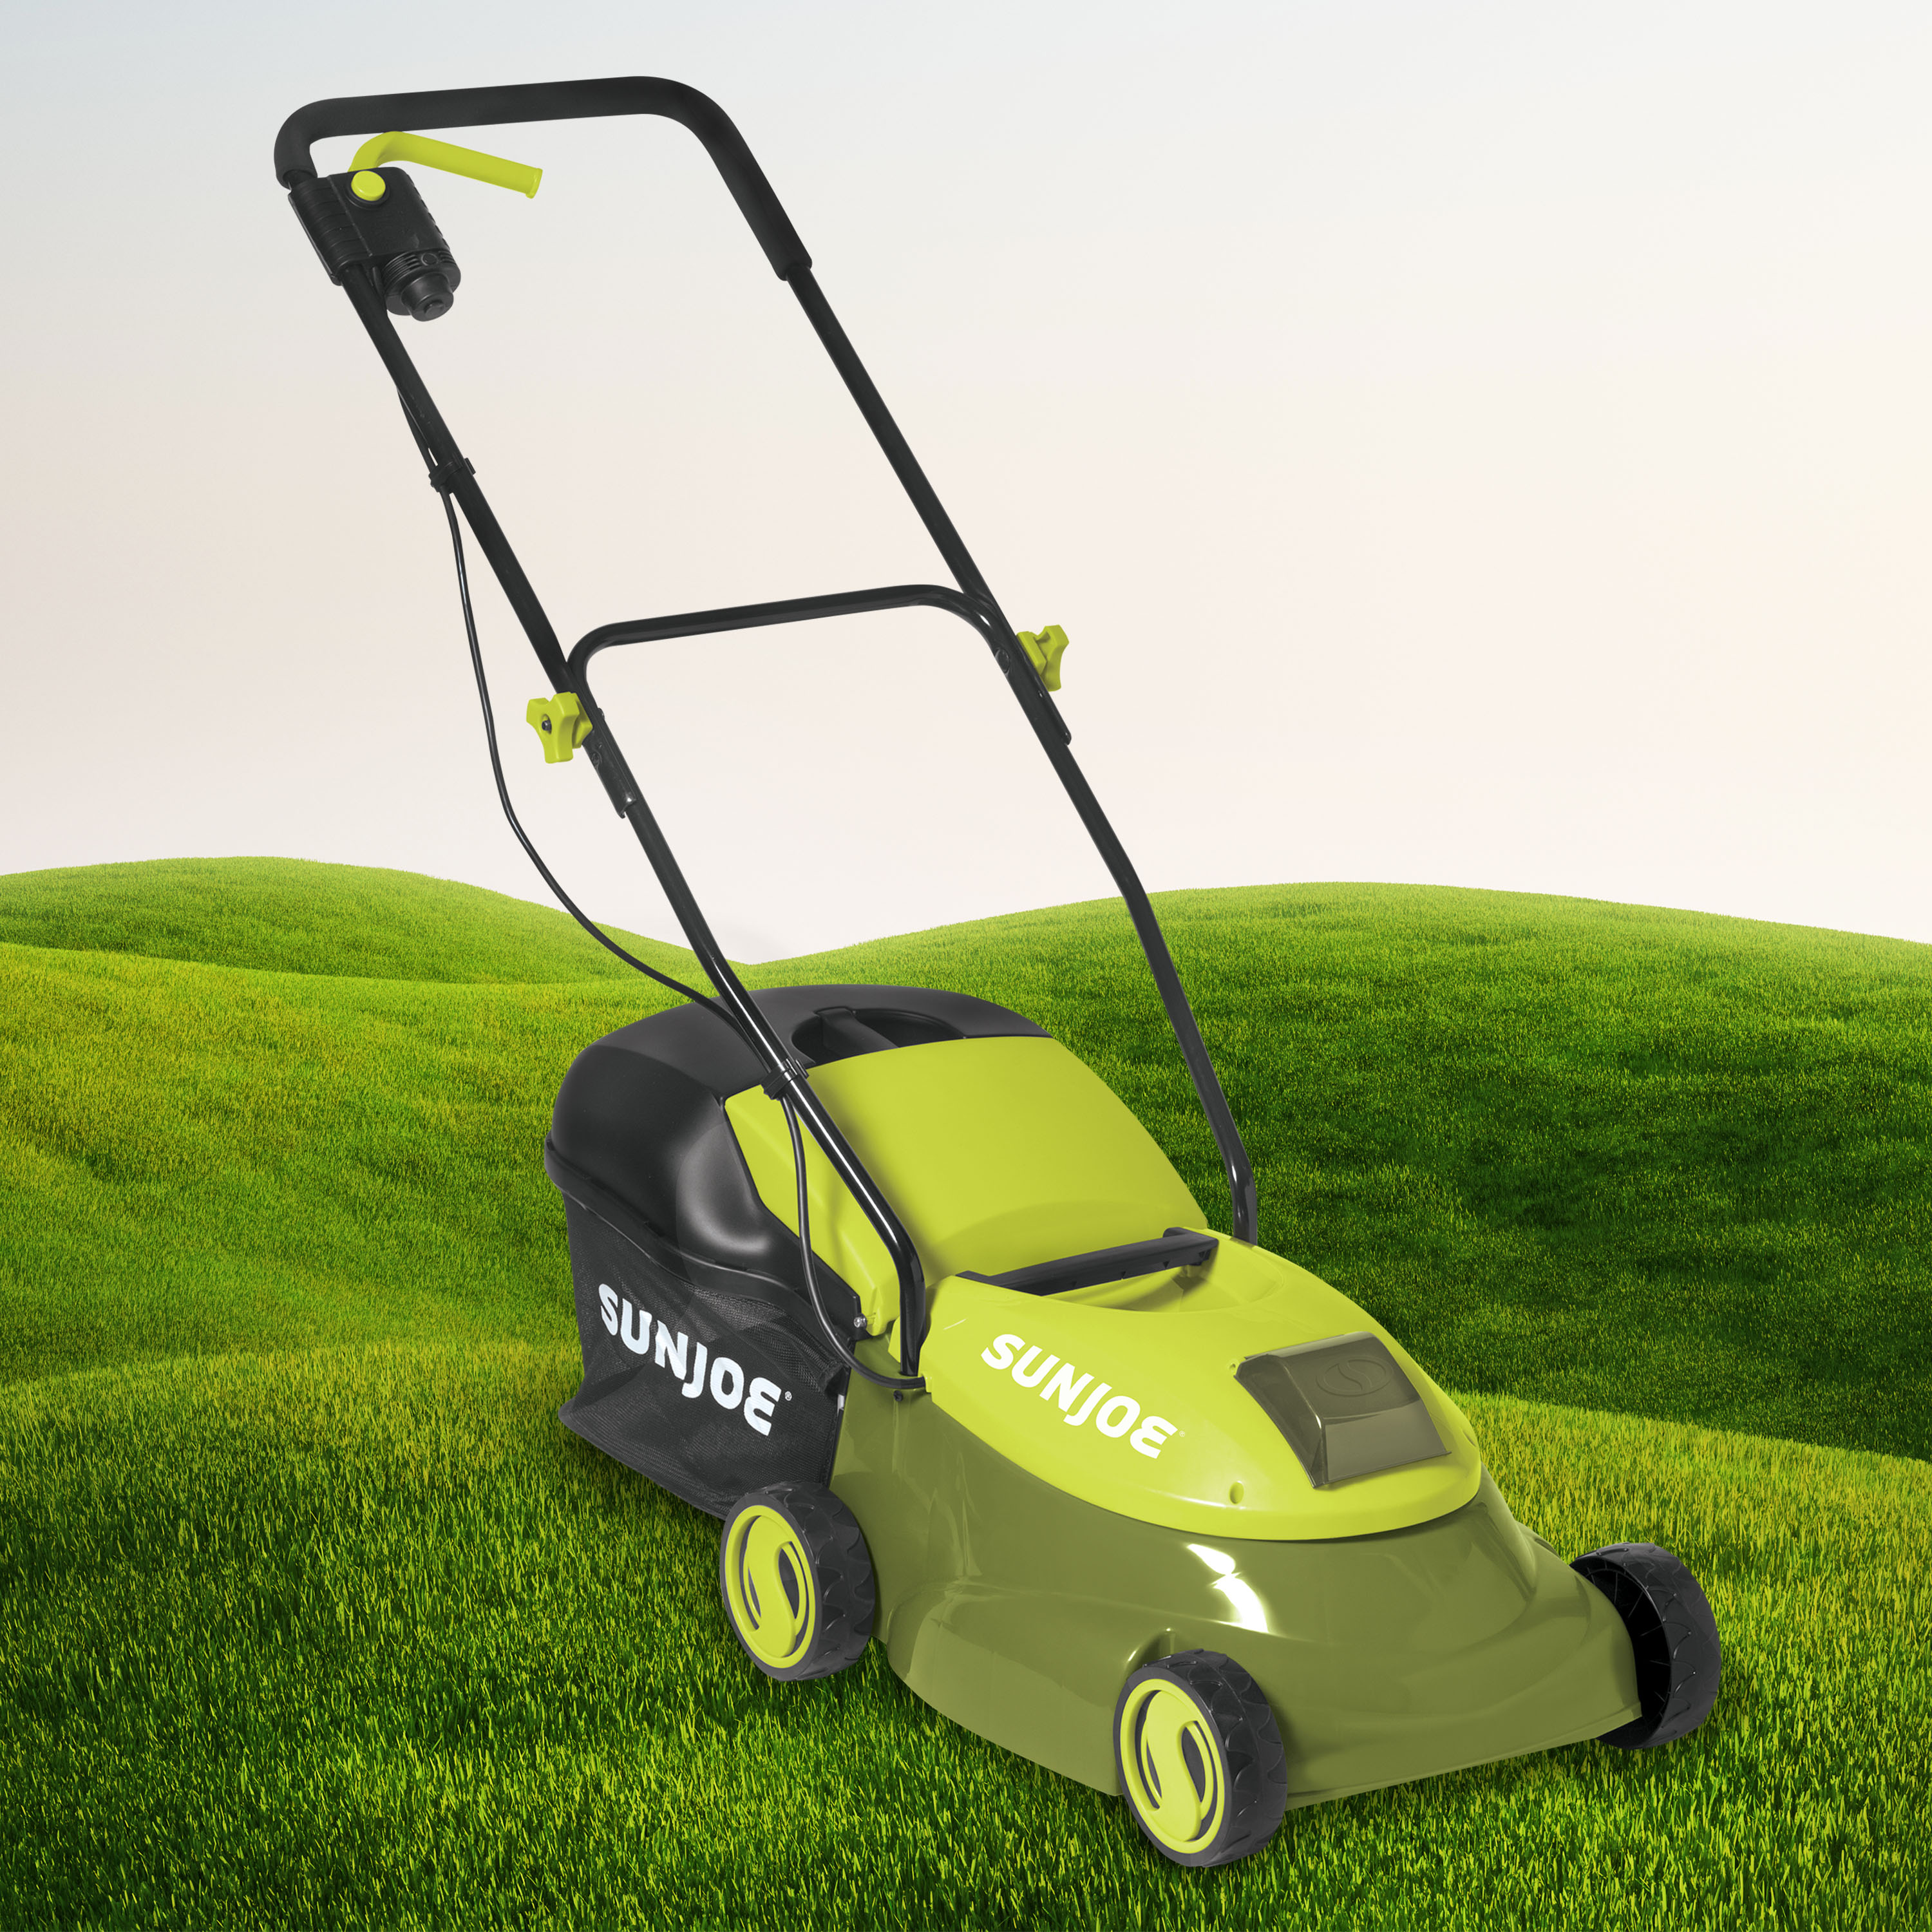 Safety Key Sun Joe MJ401C-RM 14-Inch 28-Volt Cordless Push Lawn Mower 14 inches Green Renewed 3-Position Height Adjustment w/10.6-Gallon Collection Bag 